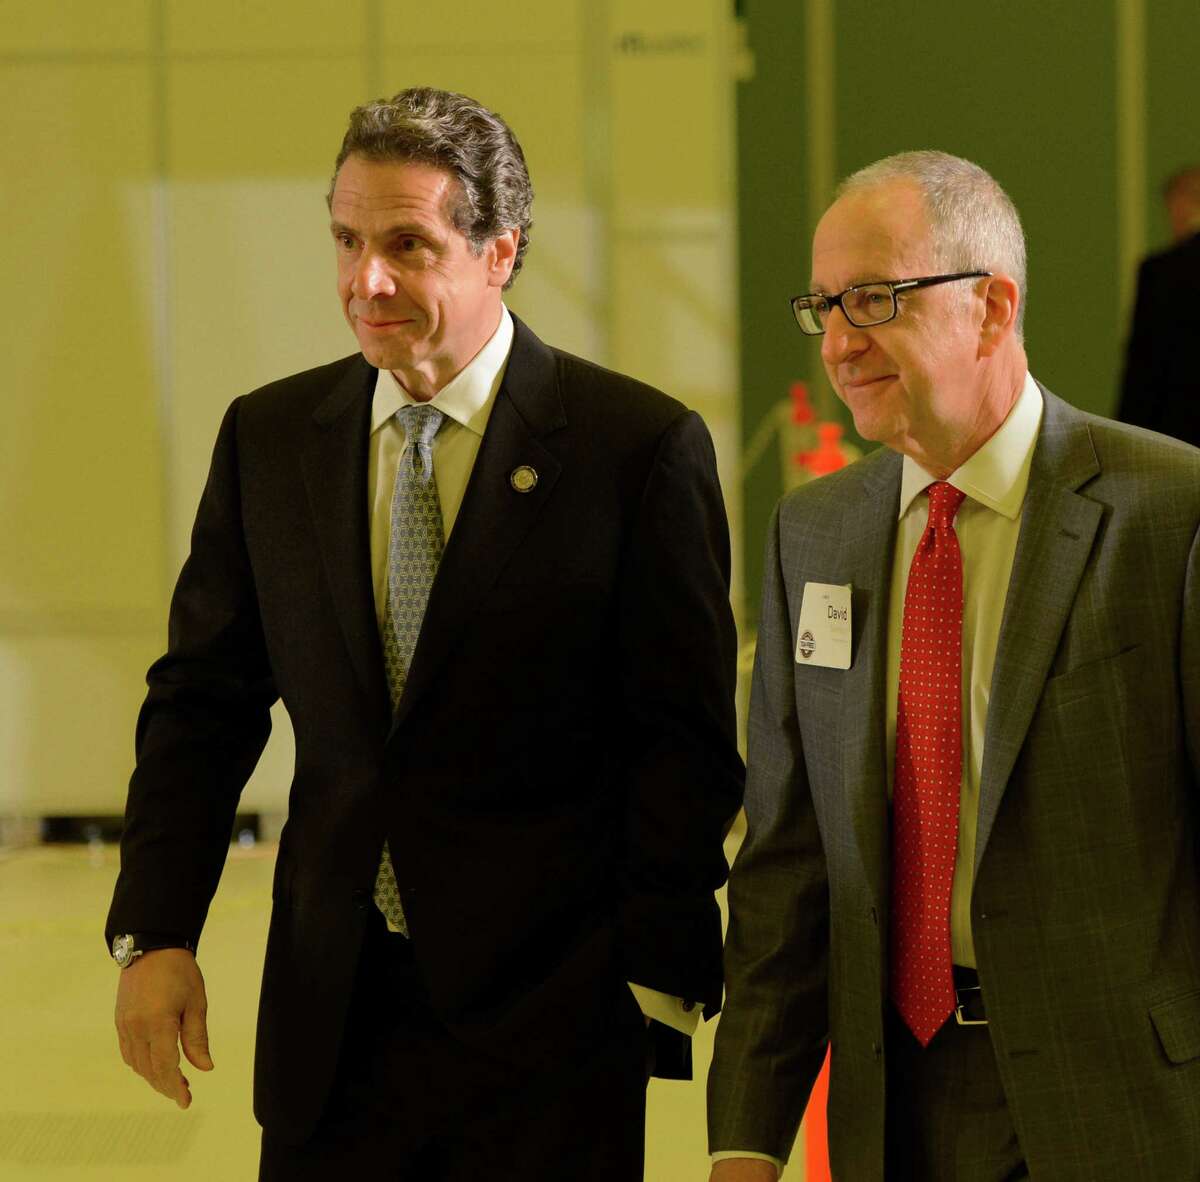 Governor Andrew Cuomo, left, is joined by Cornell president David Skorton as he continues his speaking engagements for his Tax-Free intitiative June 3, 2013, at the College of Nanoscale Science and Engineering in Albany, N.Y. (Skip Dickstein/Times Union)